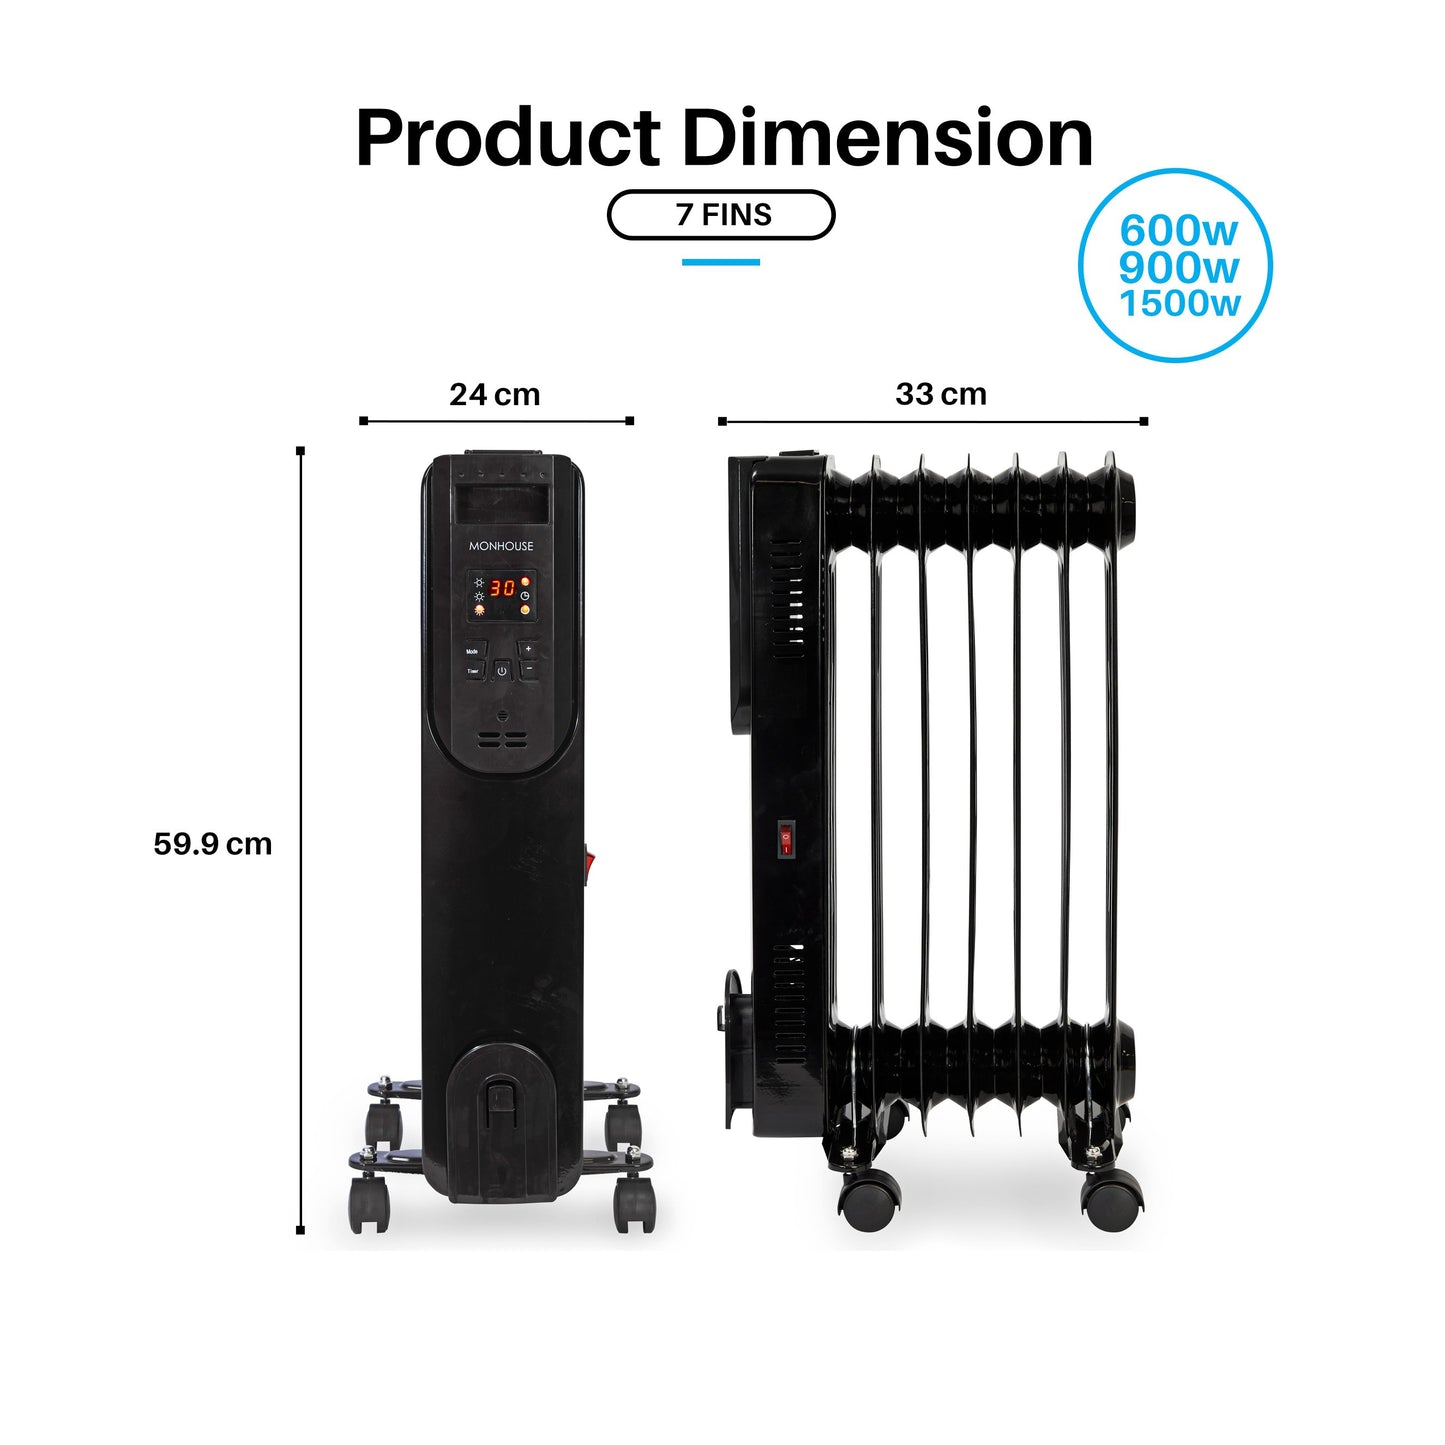 Digital Oil Filled Electric Heater Remote Control Powerful 7-11 Fins 600-2500W